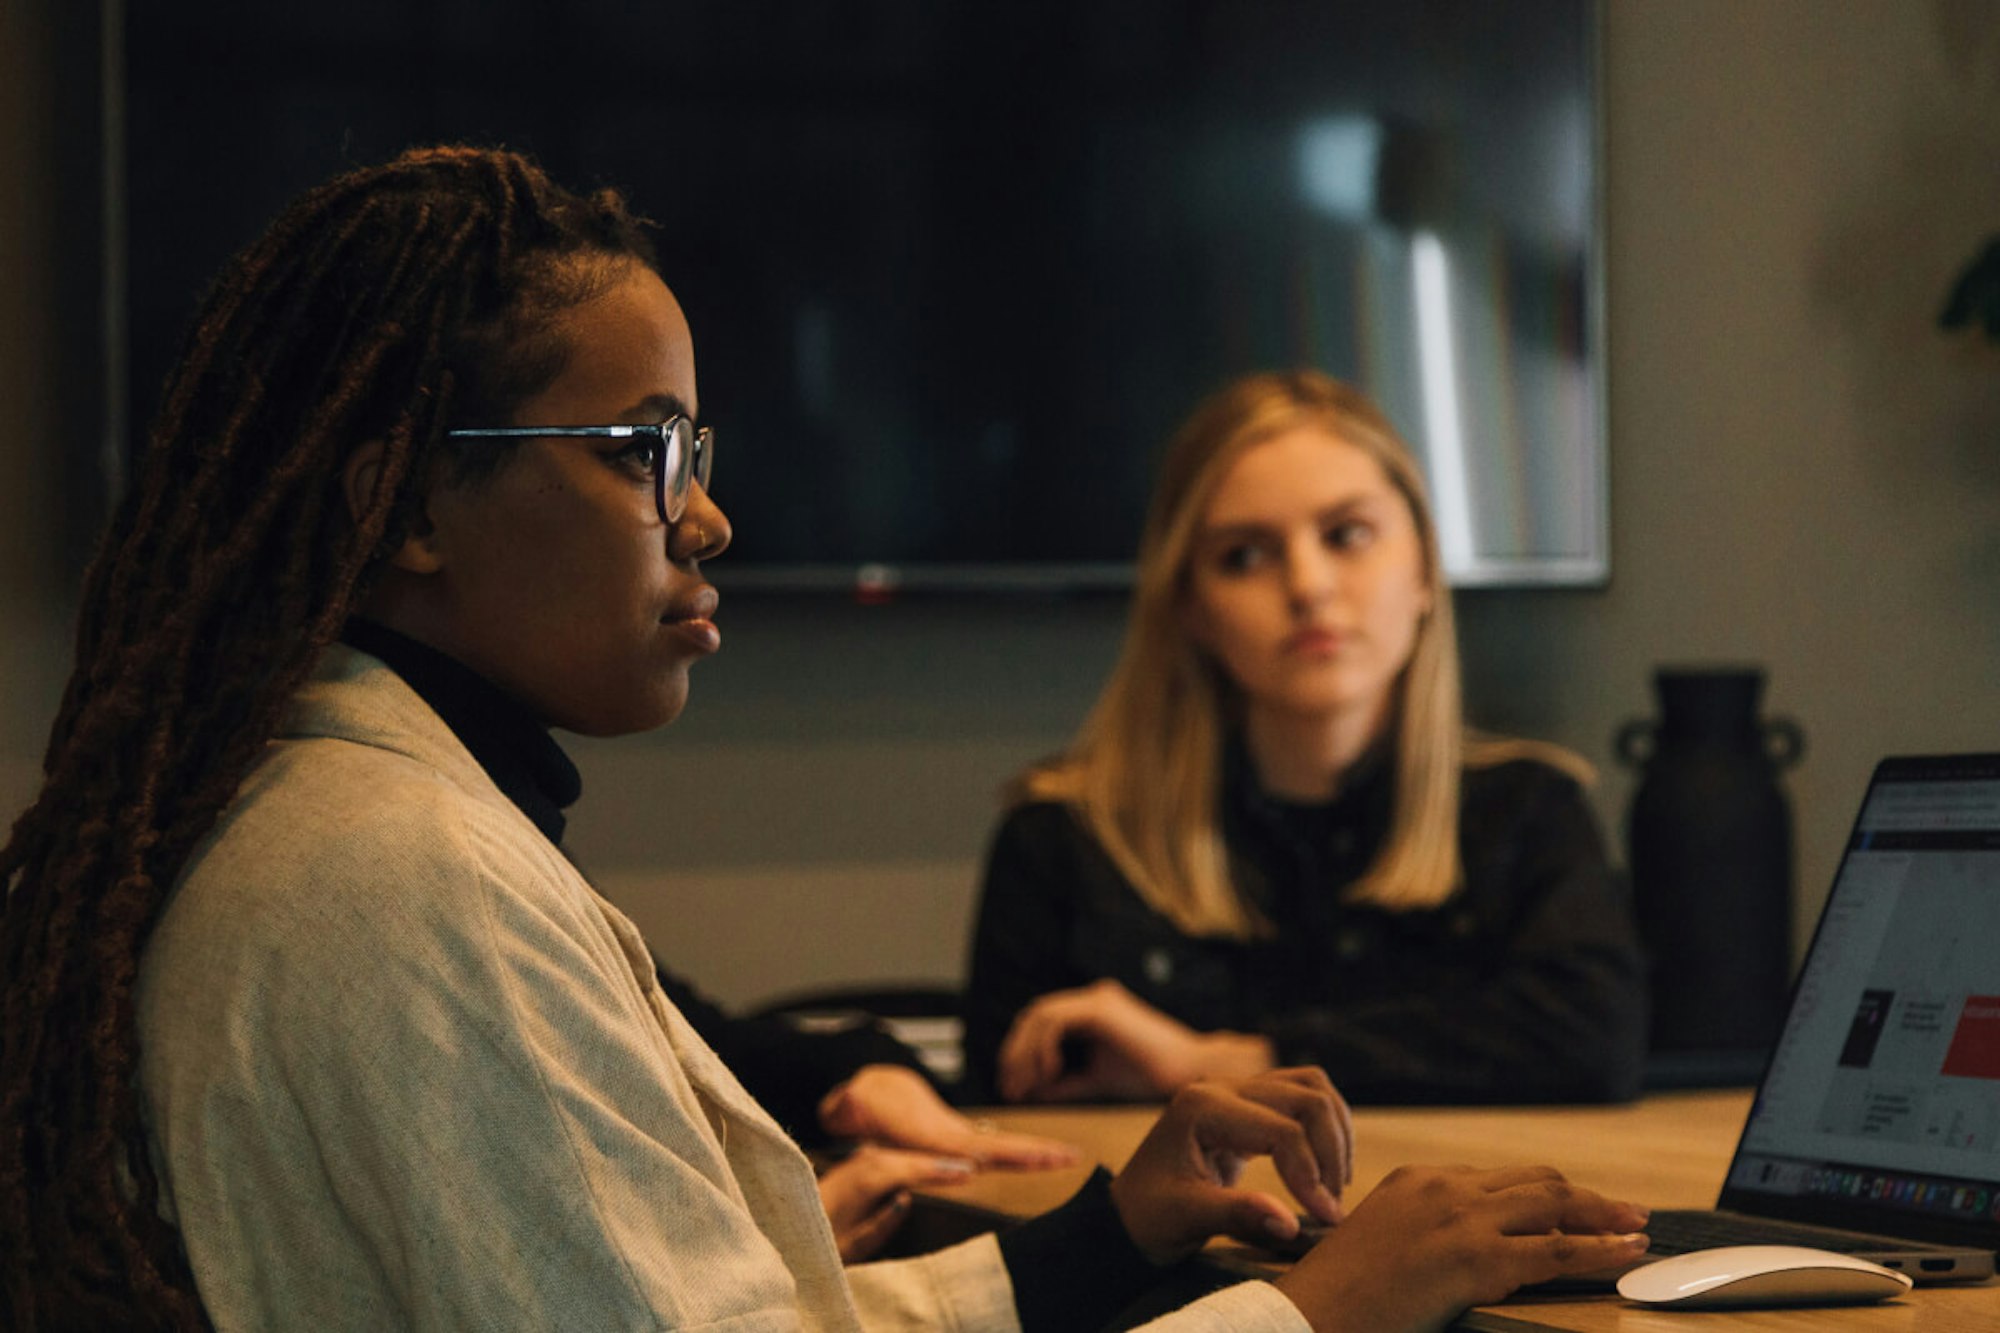 MakeReign women team members collaborating at an office with laptops, one wearing glasses and locs while blonde woman looks at the first woman with a screen in the background